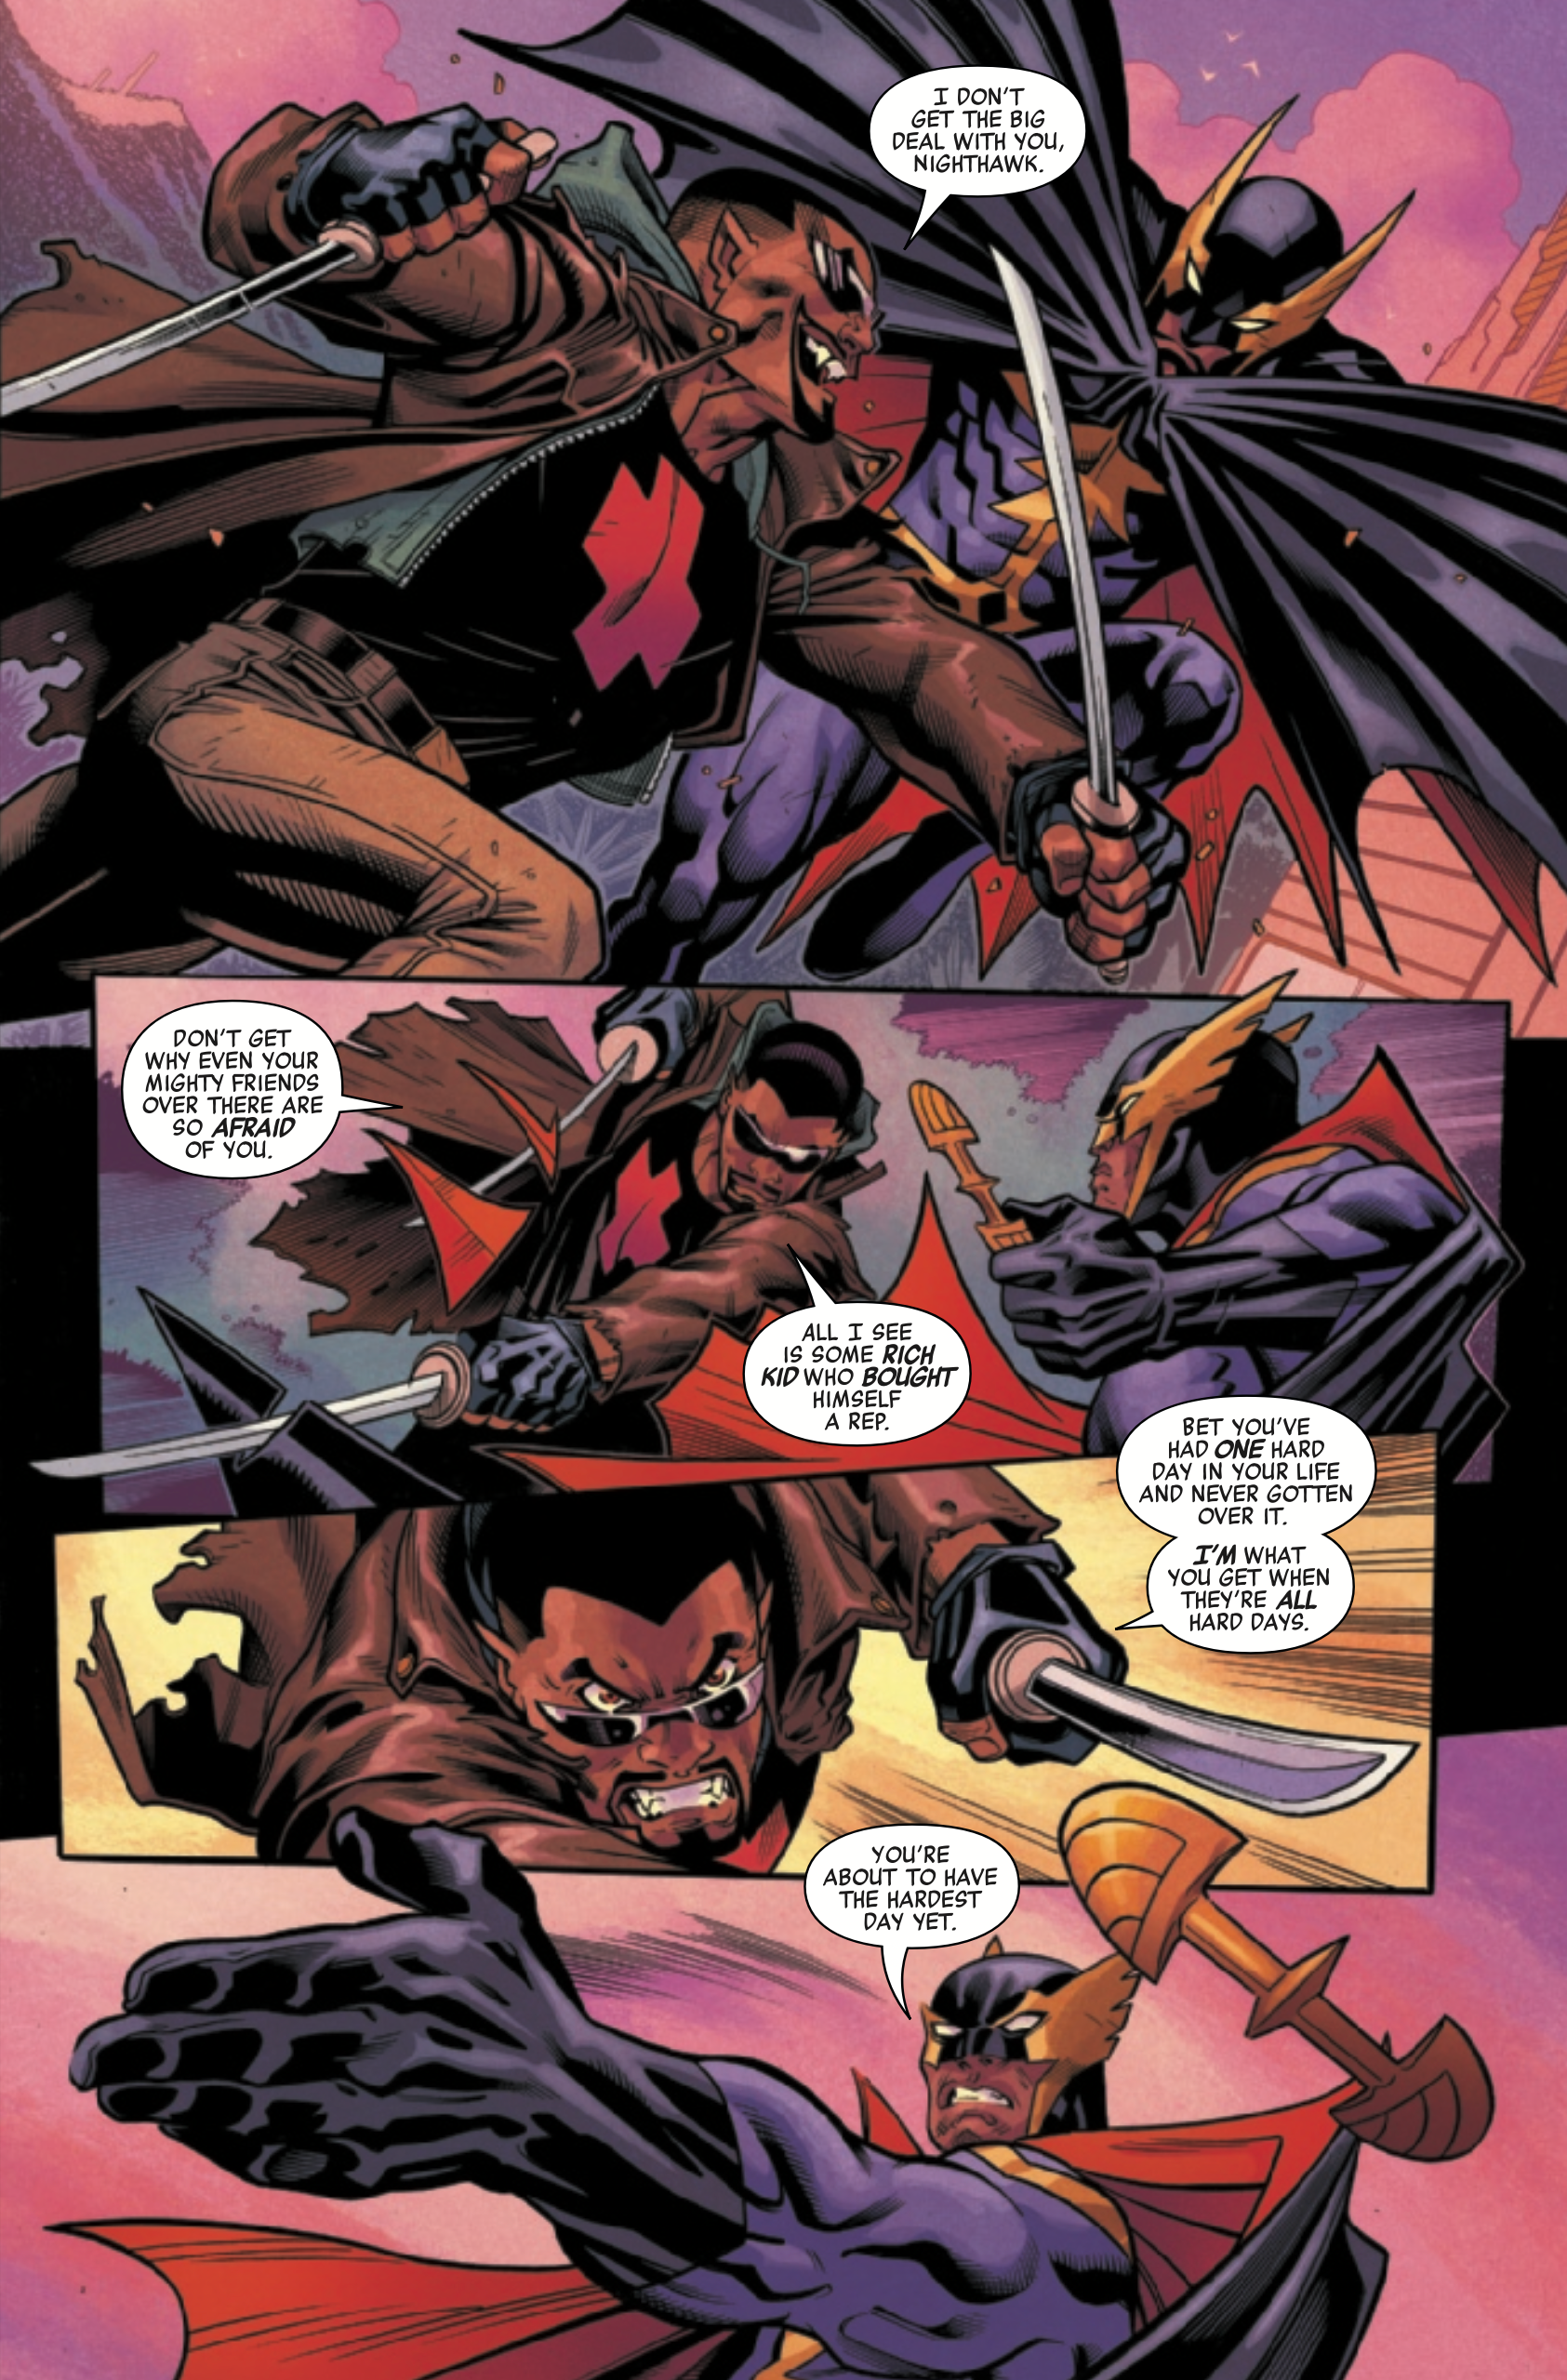 Blade Just Decimated Batman With a Single Insult